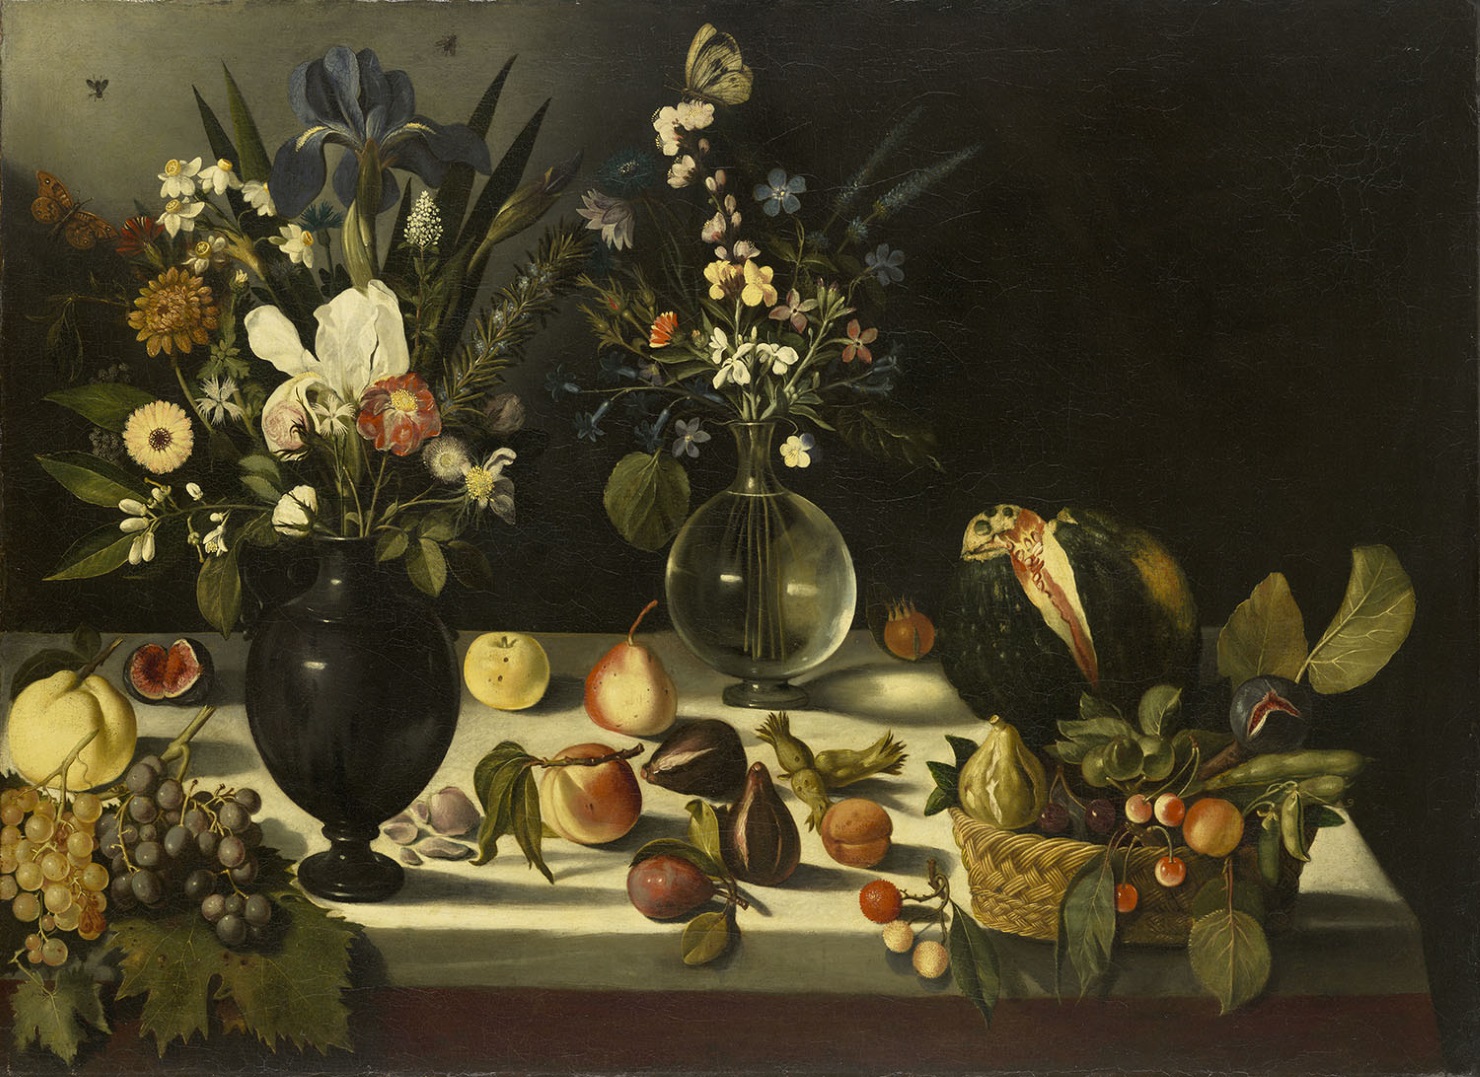 Caravaggio - Still Life with Flowers and Fruits 1600-1610